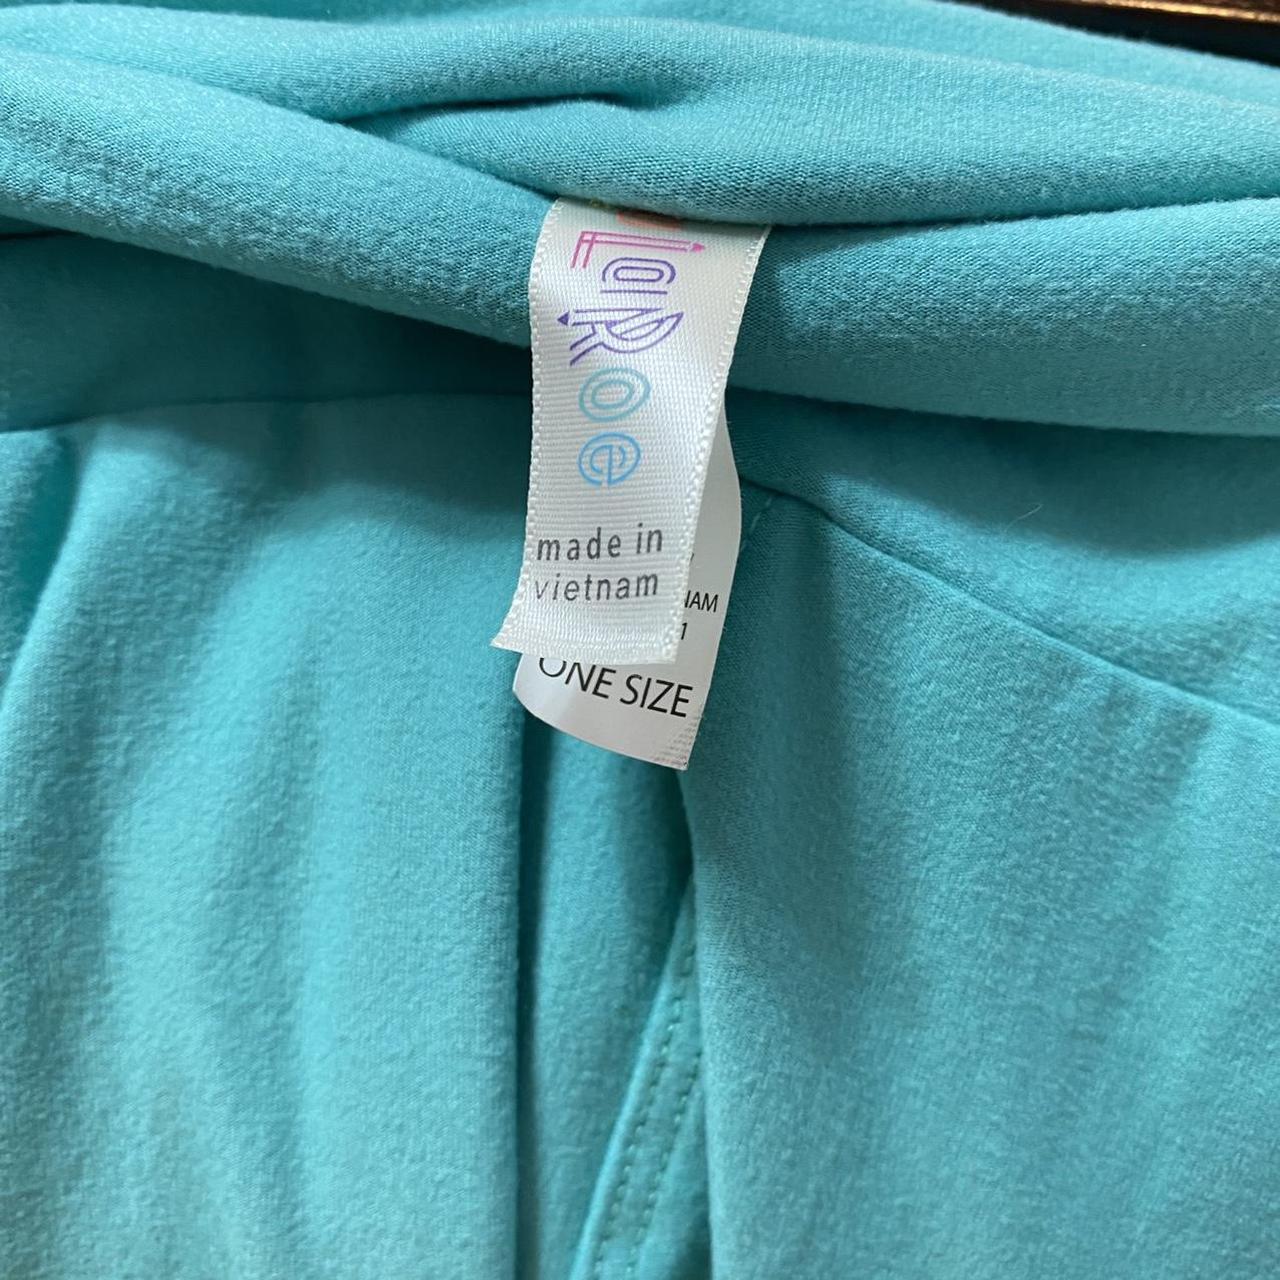 Teal Lularoe Leggings, One size best for a small or